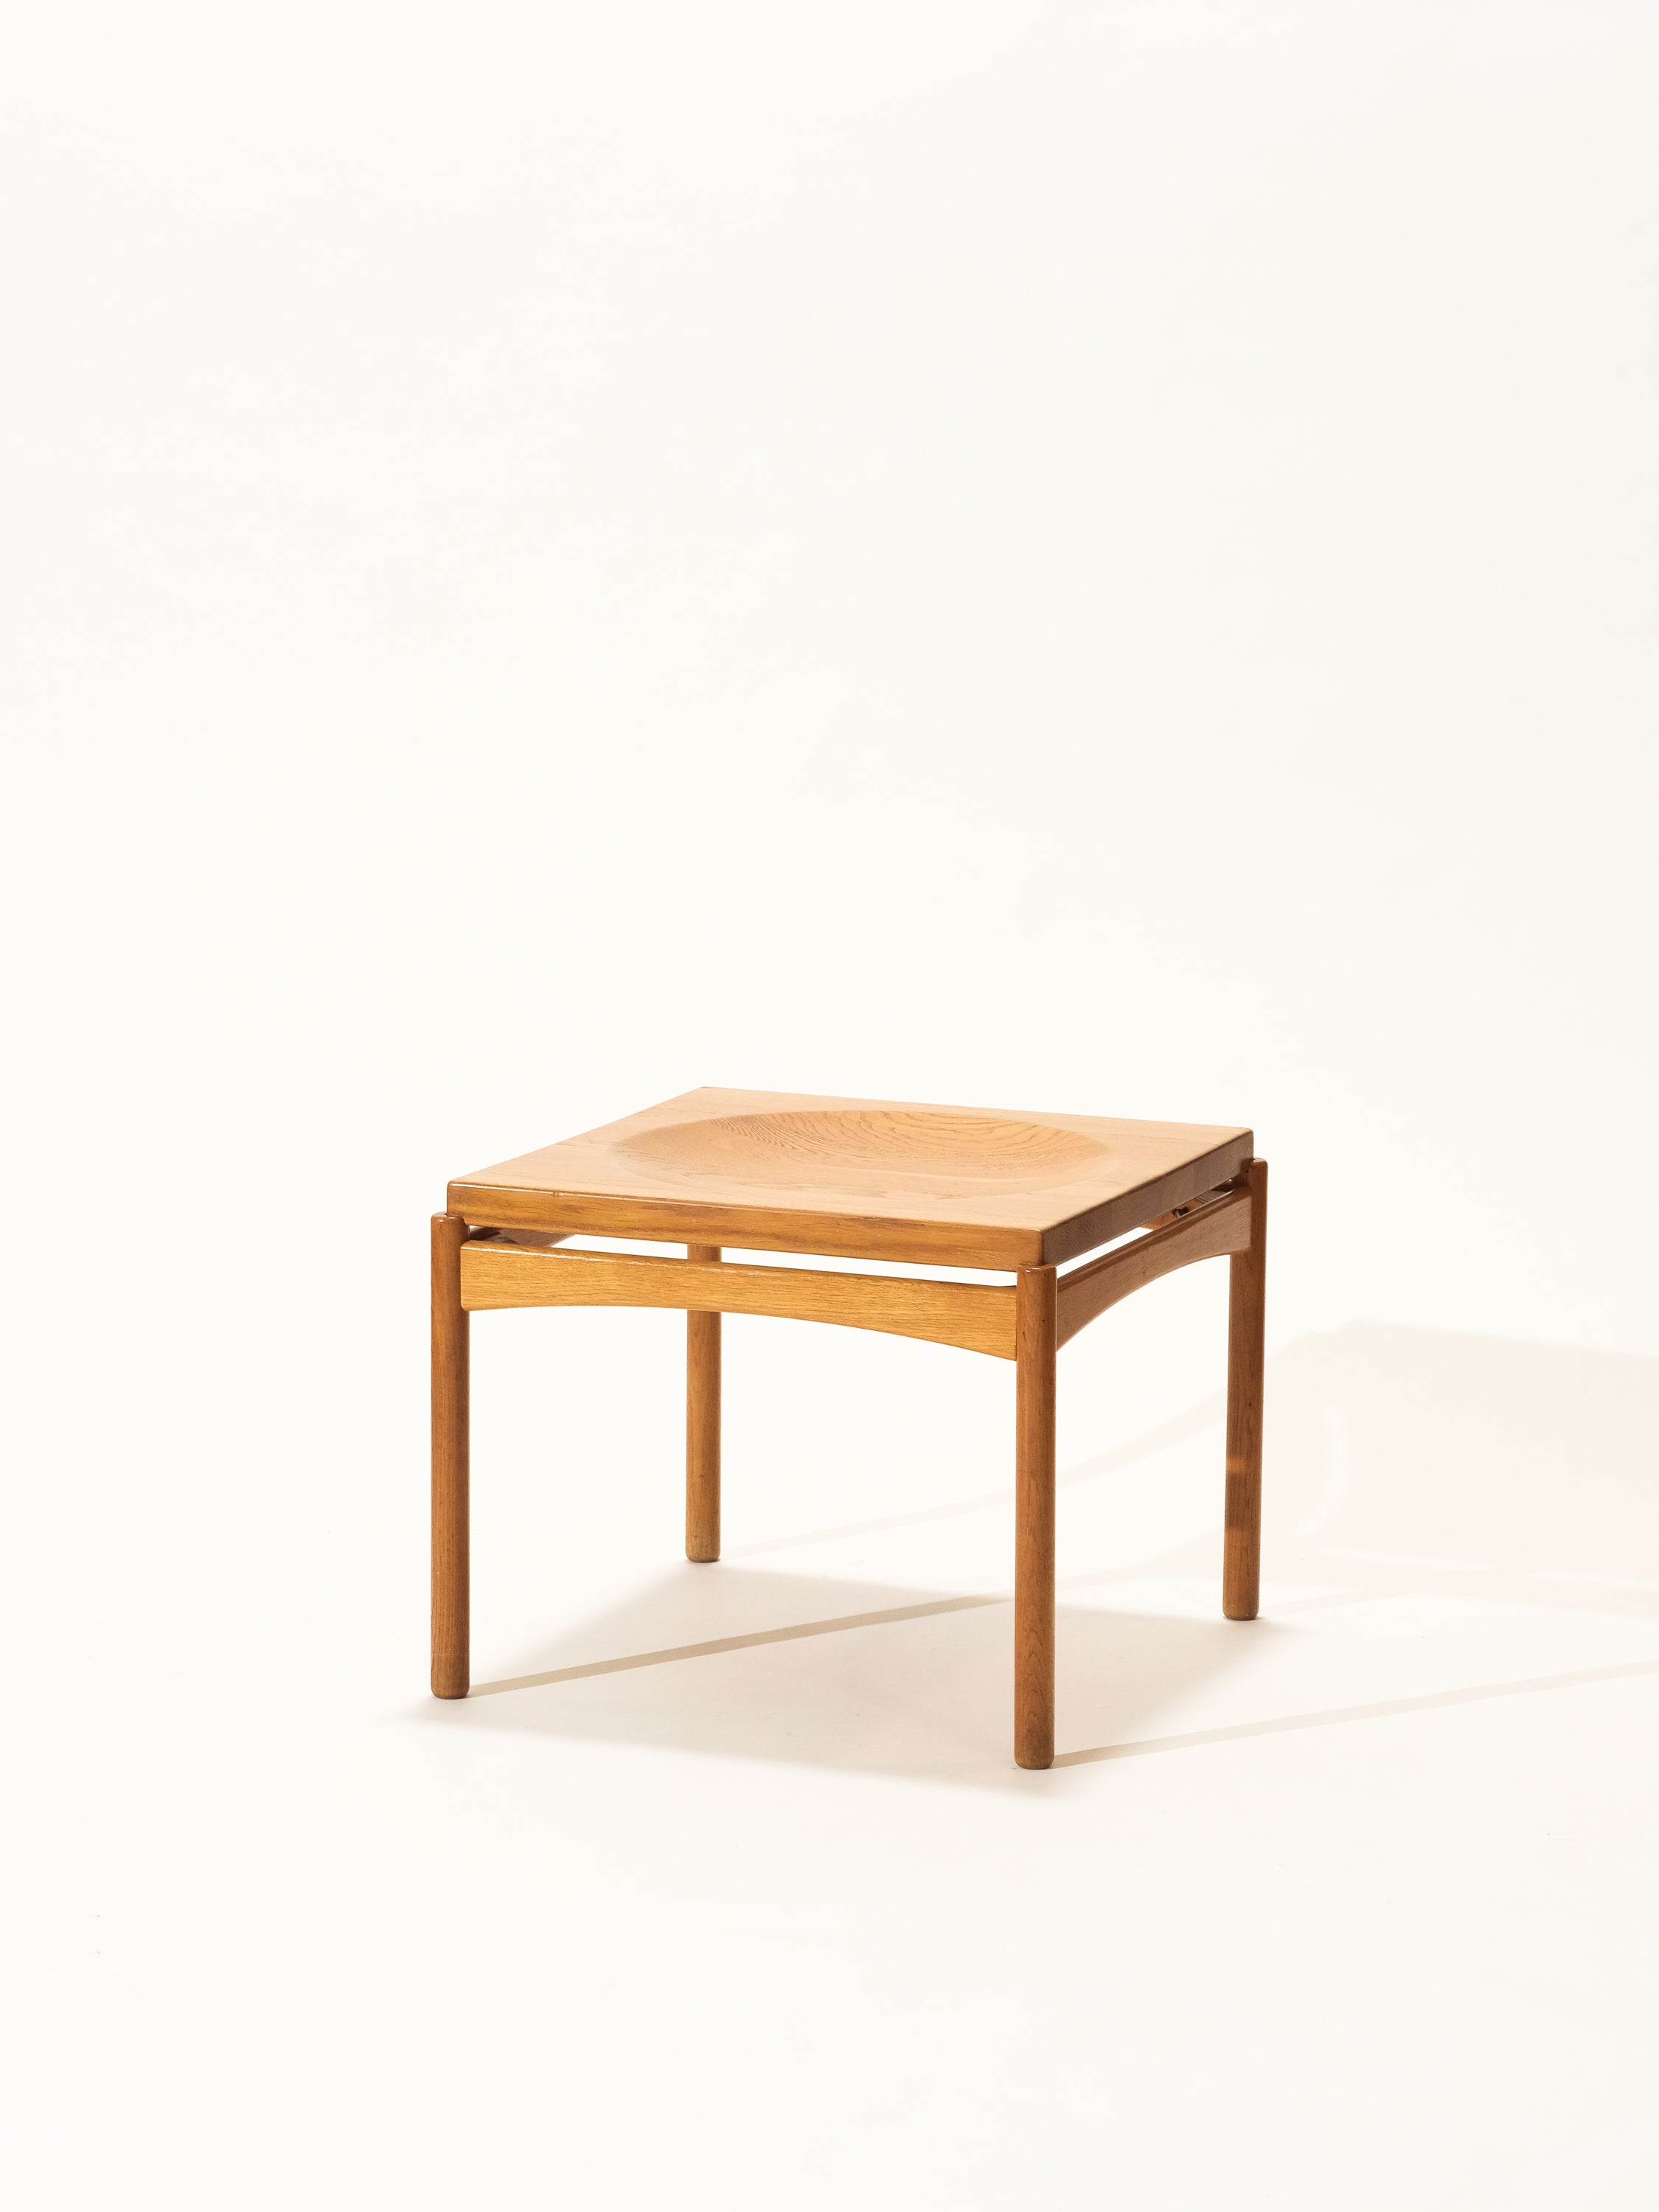 Solid Oak Coffee/Tray Table by Gunnar Myrstrand for Källemo, Sweden, 1960s